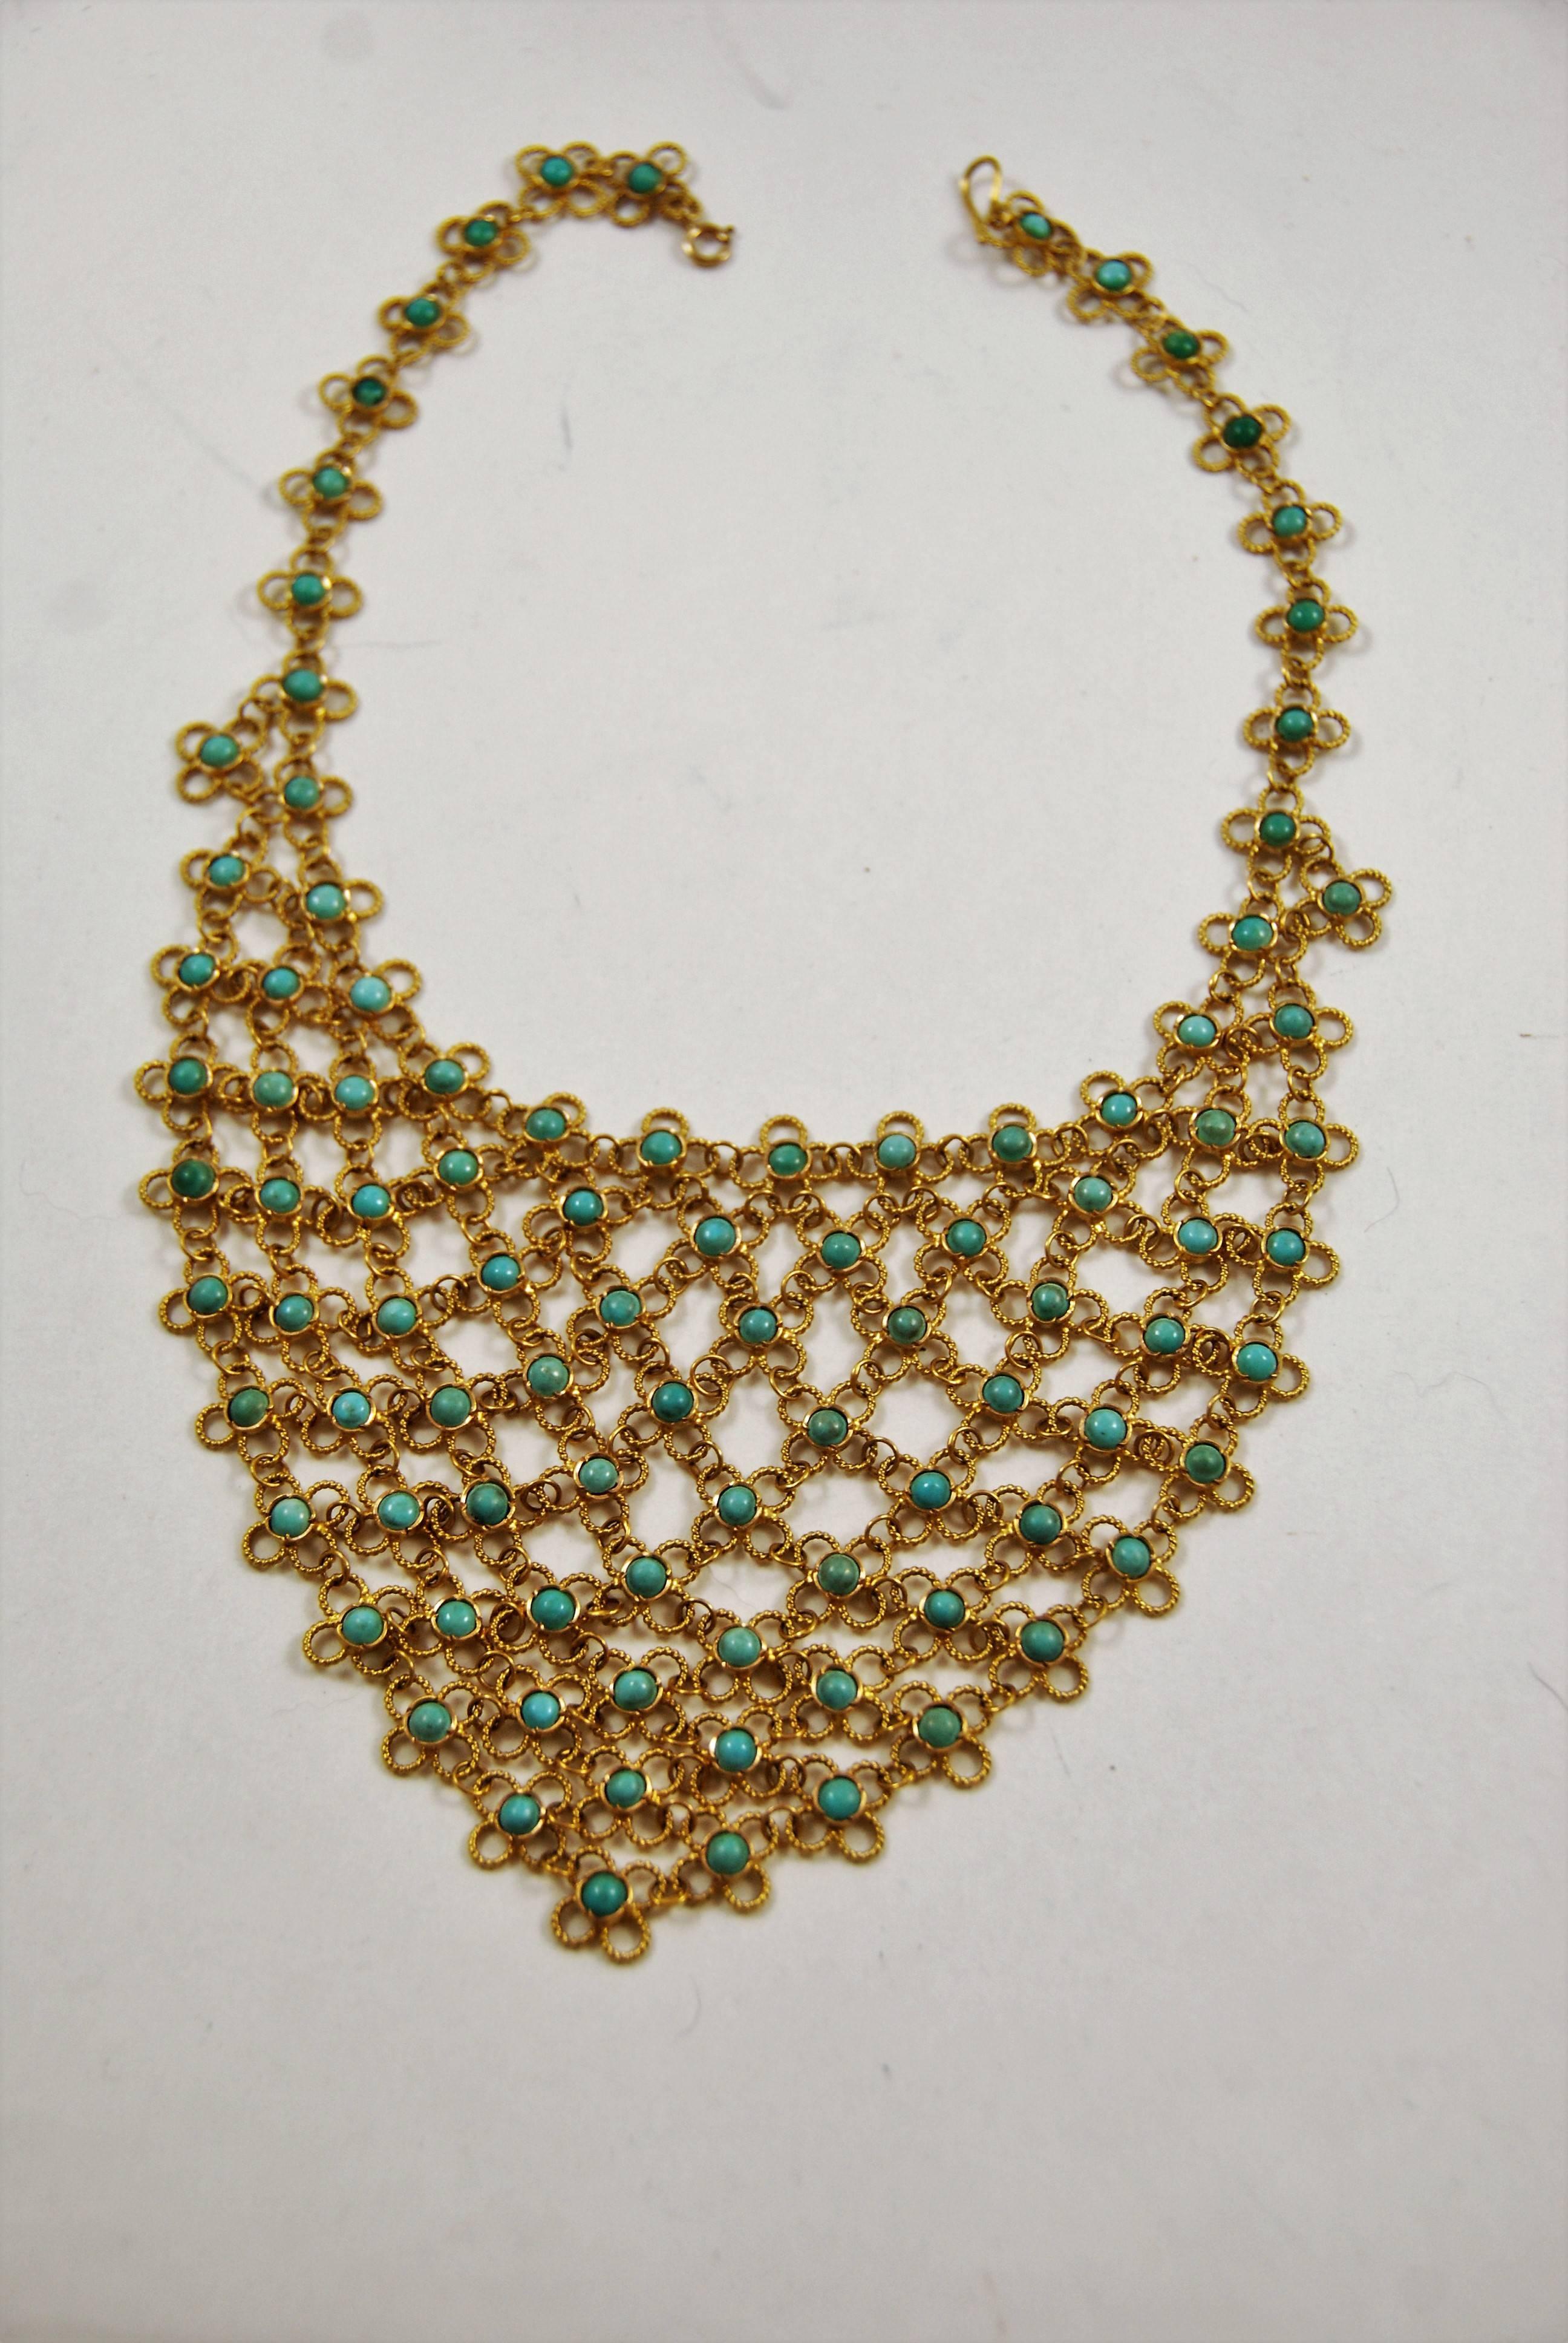 Turquoise and 14k gold bib necklace. Each piece us joined to the othes via a ring making the necklace very flexible. The gold on each piece is in a twisted rope design. The center triangle measures about 6